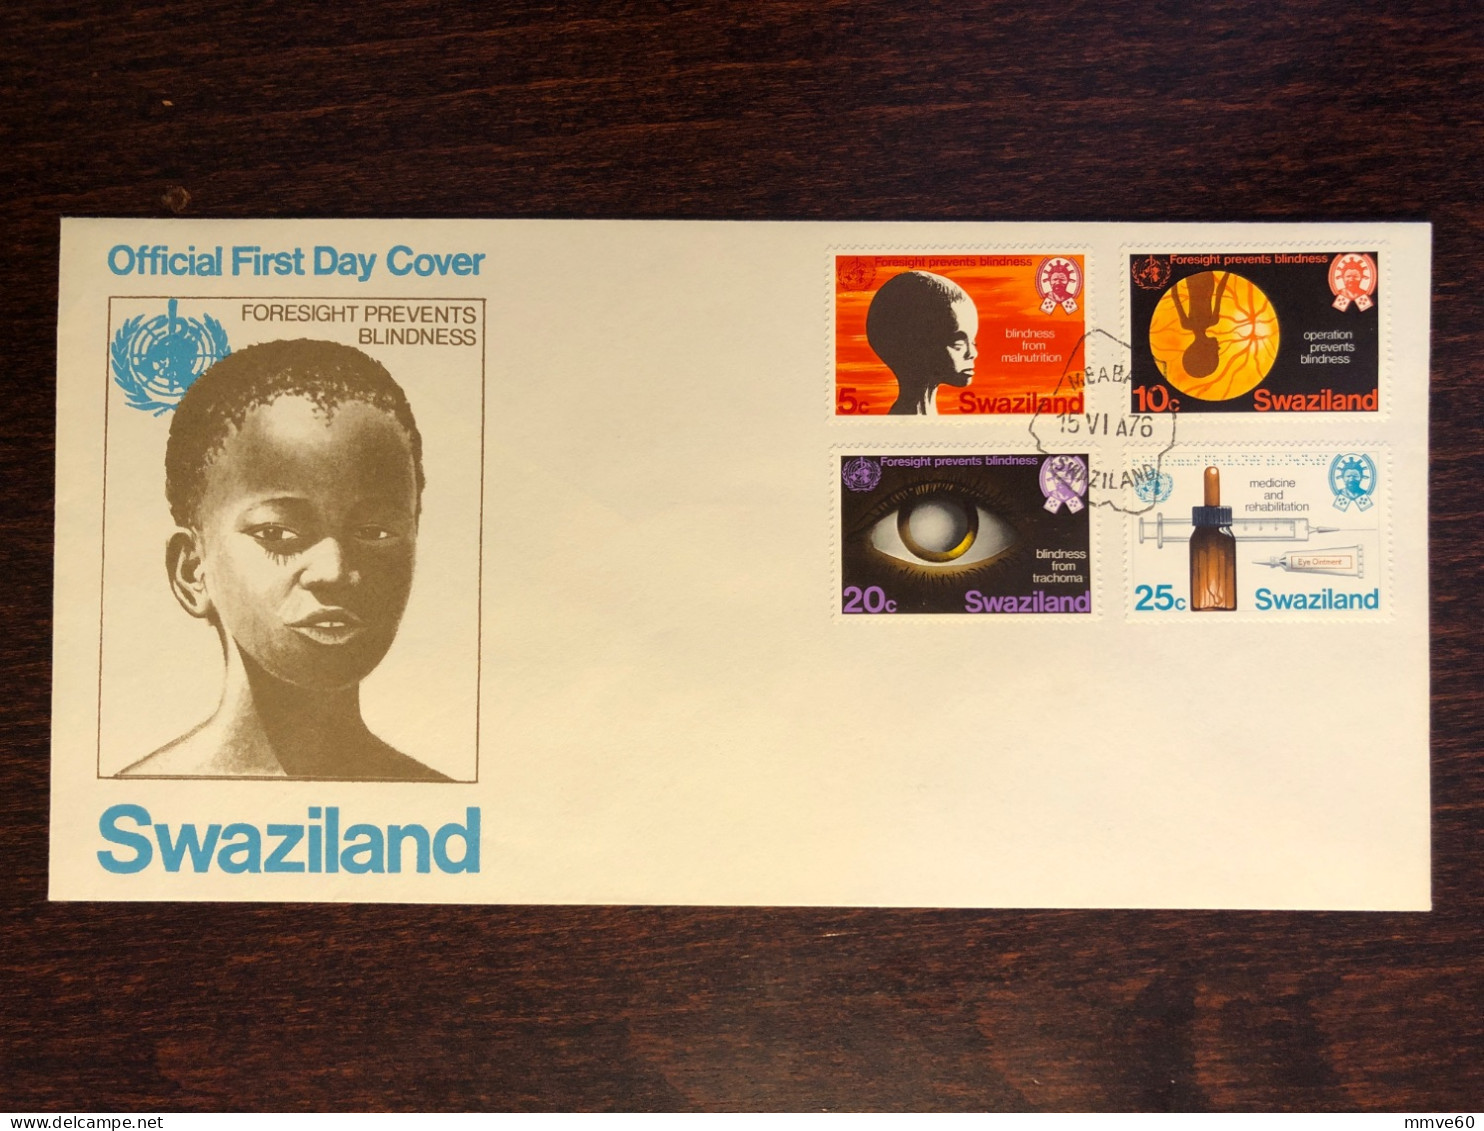 SWAZILAND FDC COVER 1976 YEAR OPHTHALMOLOGY BLINDNESS BLIND HEALTH MEDICINE STAMPS - Swaziland (1968-...)